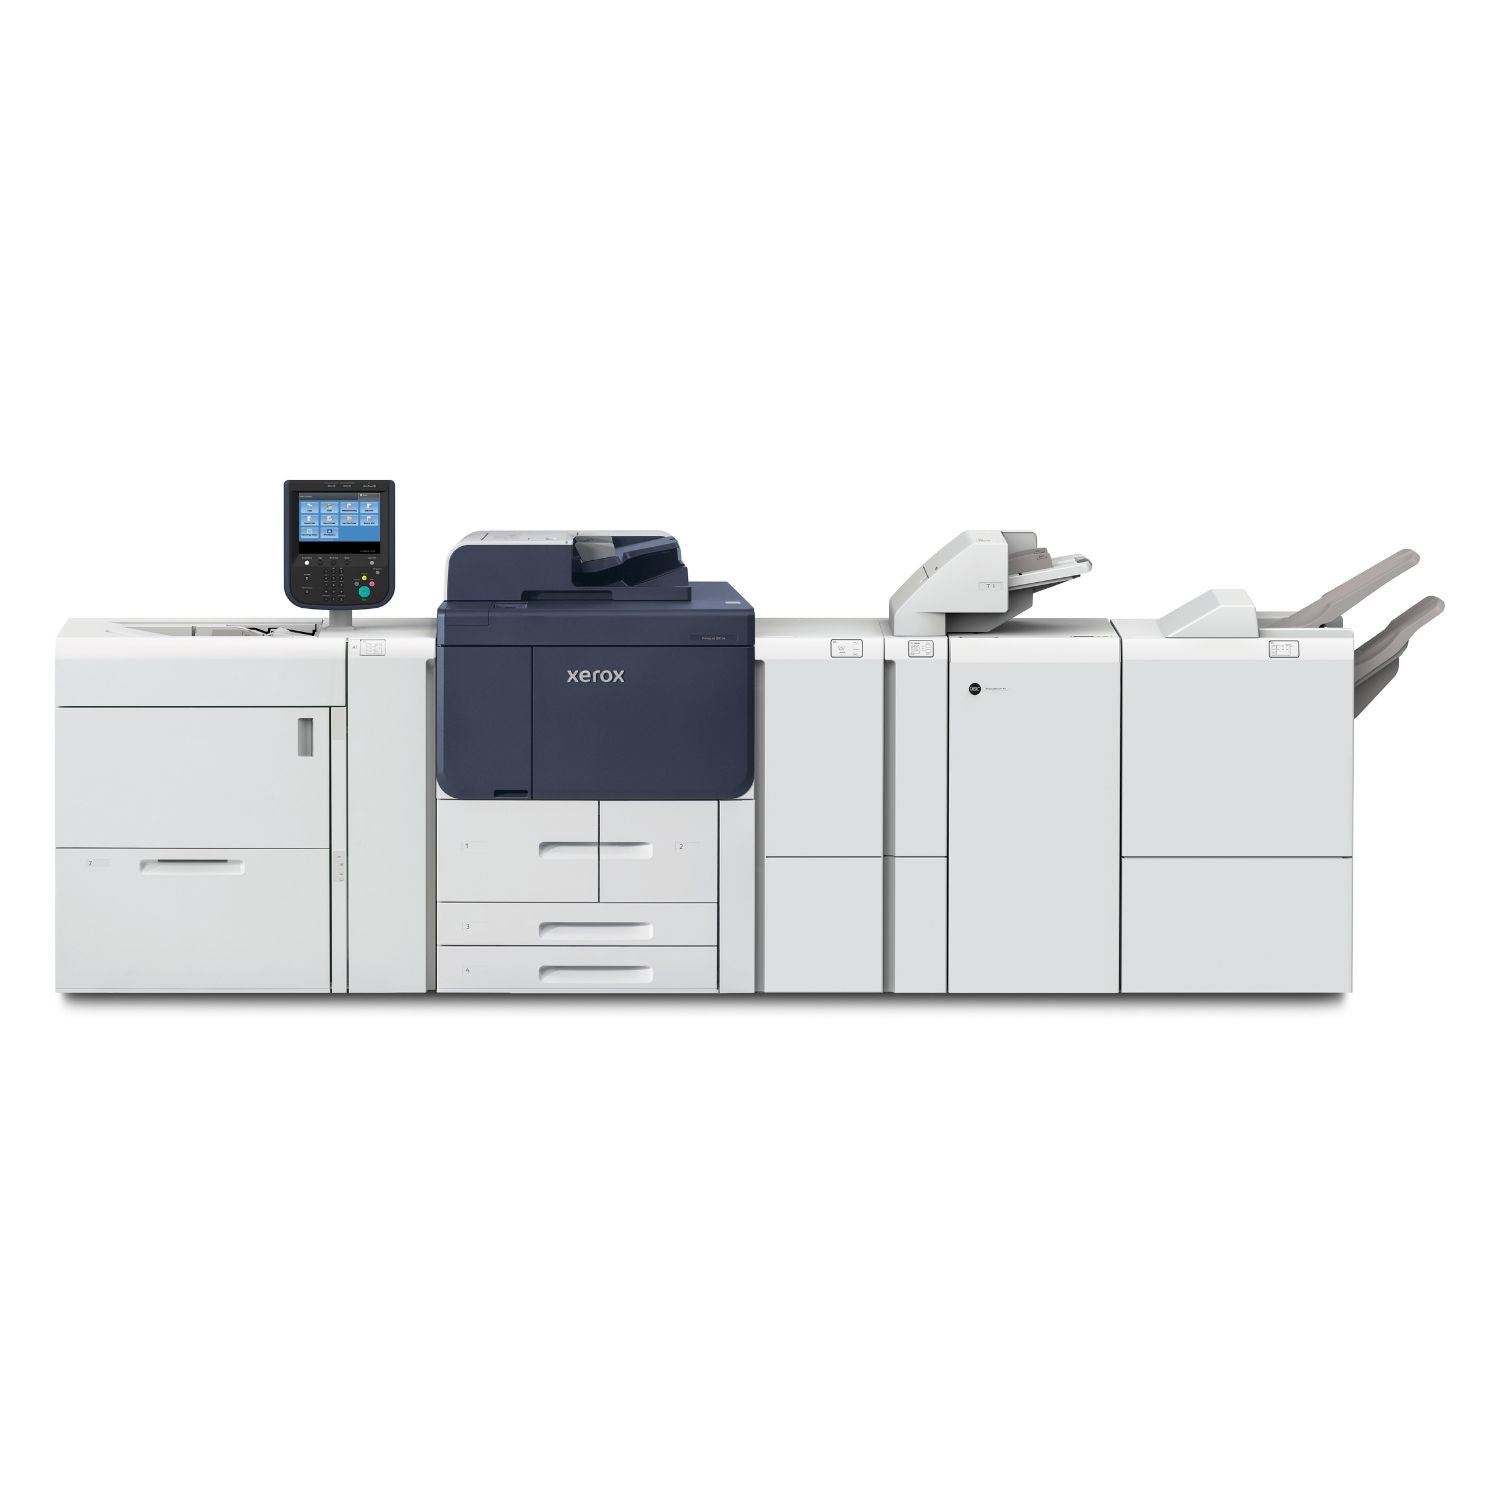 ALL-INCLUSIVE Xerox PrimeLink C9065/C9070 PRODUCTION PRINTER Full Color + UV Fluorescent, Metallics, White and Clear option